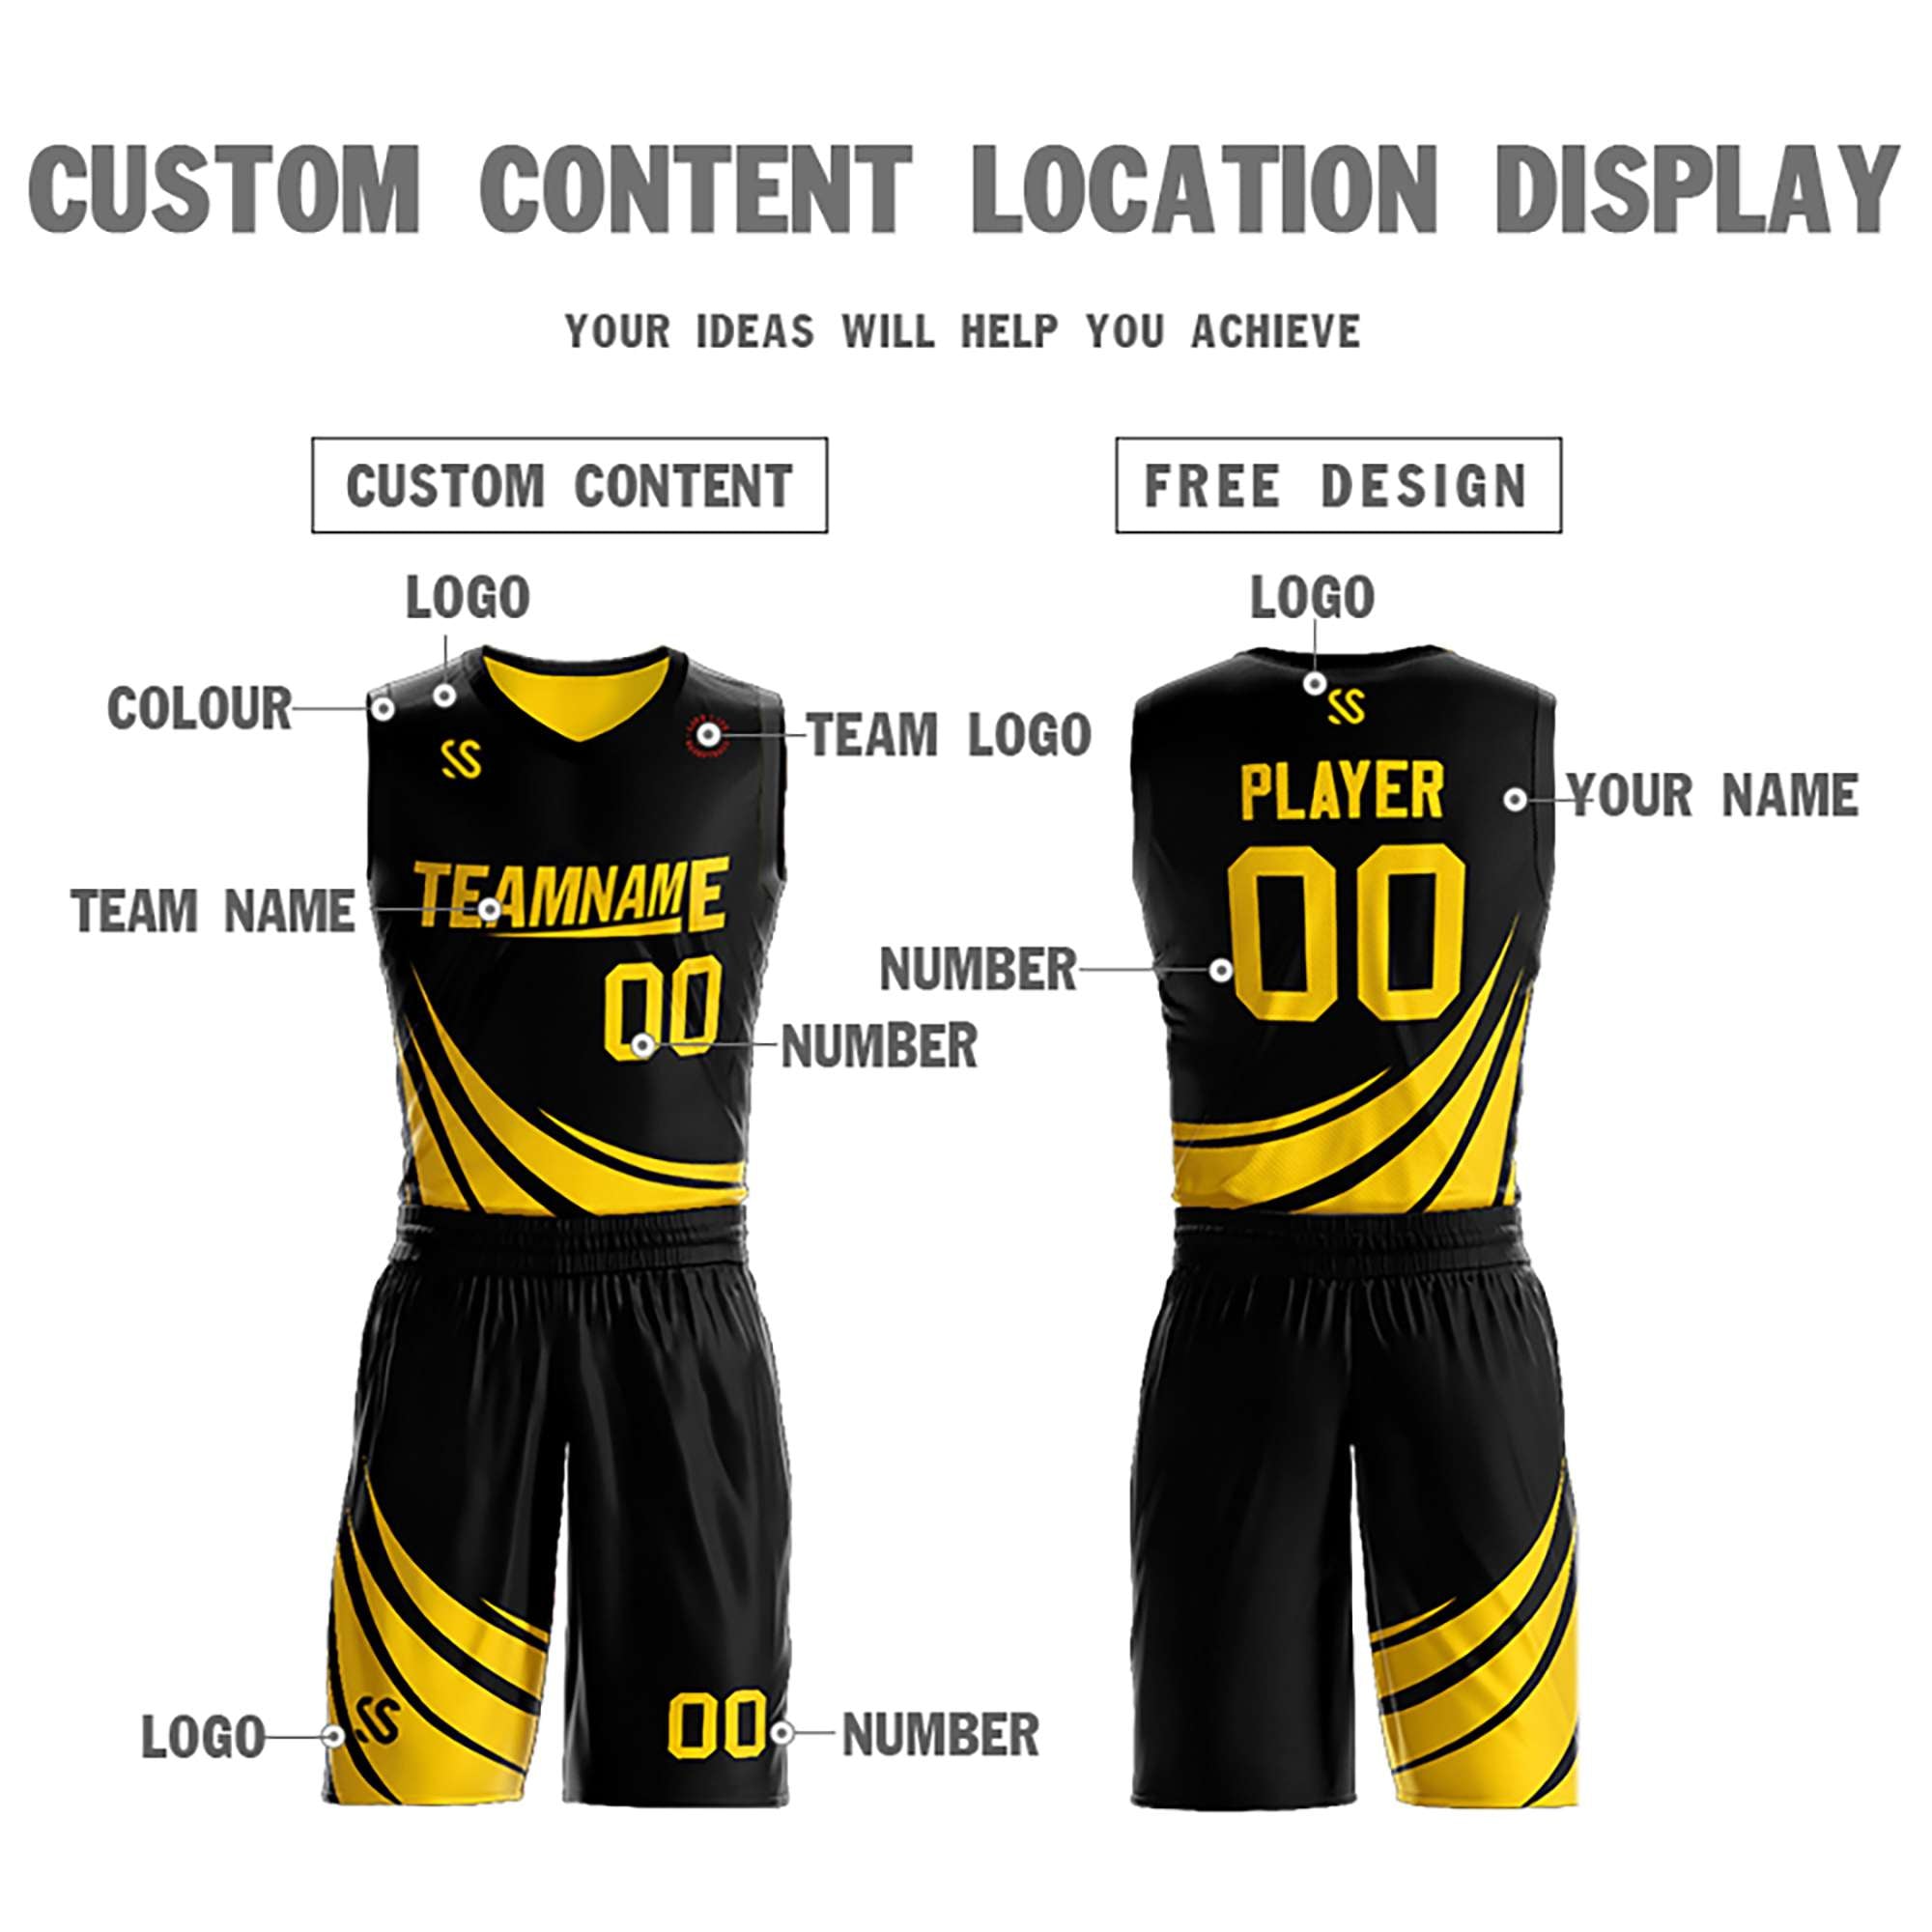 new style of basketball jersey yellow black basketball top short